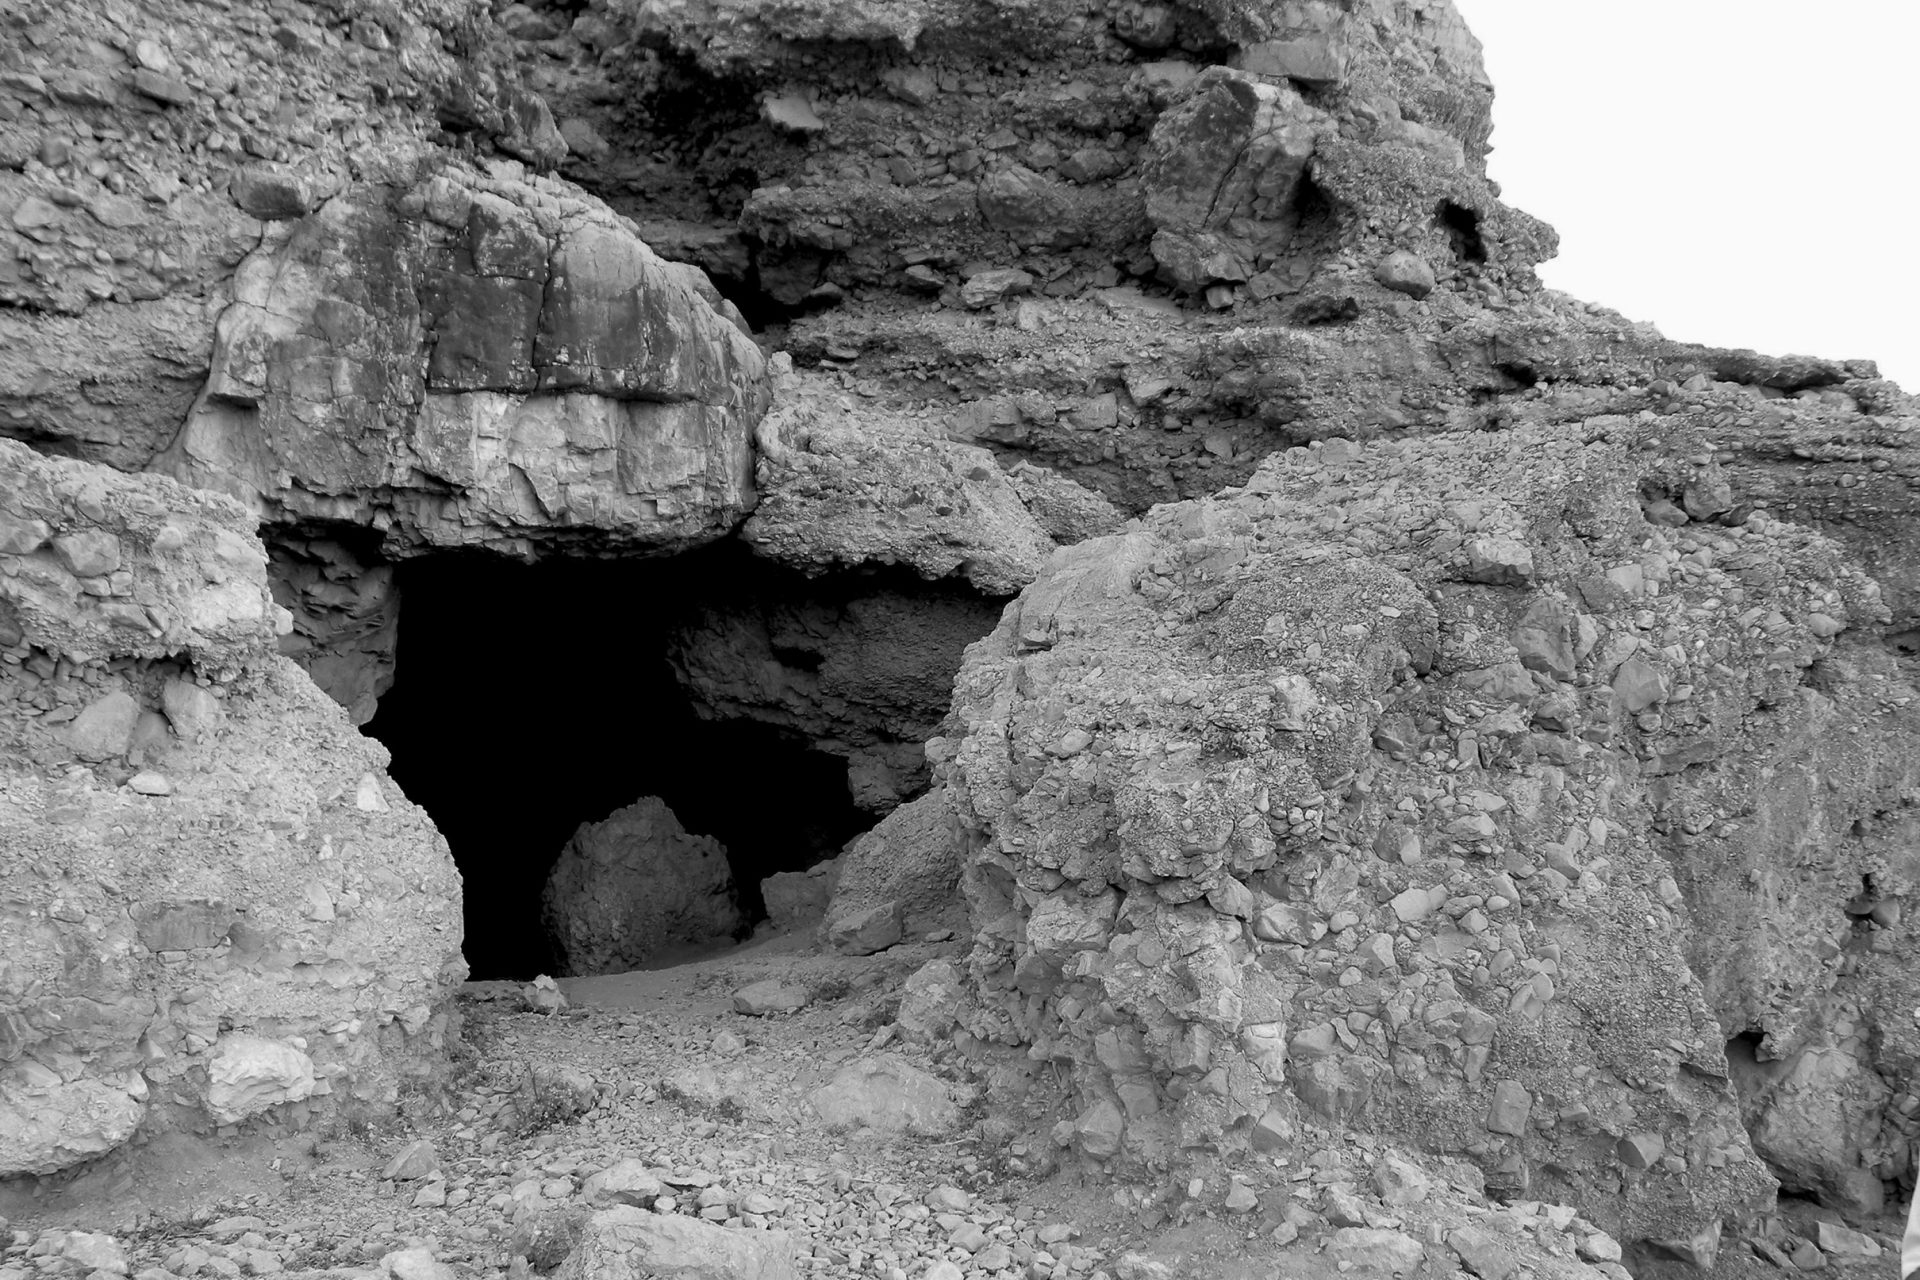 Some of the Dead Sea Scrolls were discovered in Cave 11, near the archaeological site of Qumran, in the West Bank. Photo courtesy of Wikimedia Commons